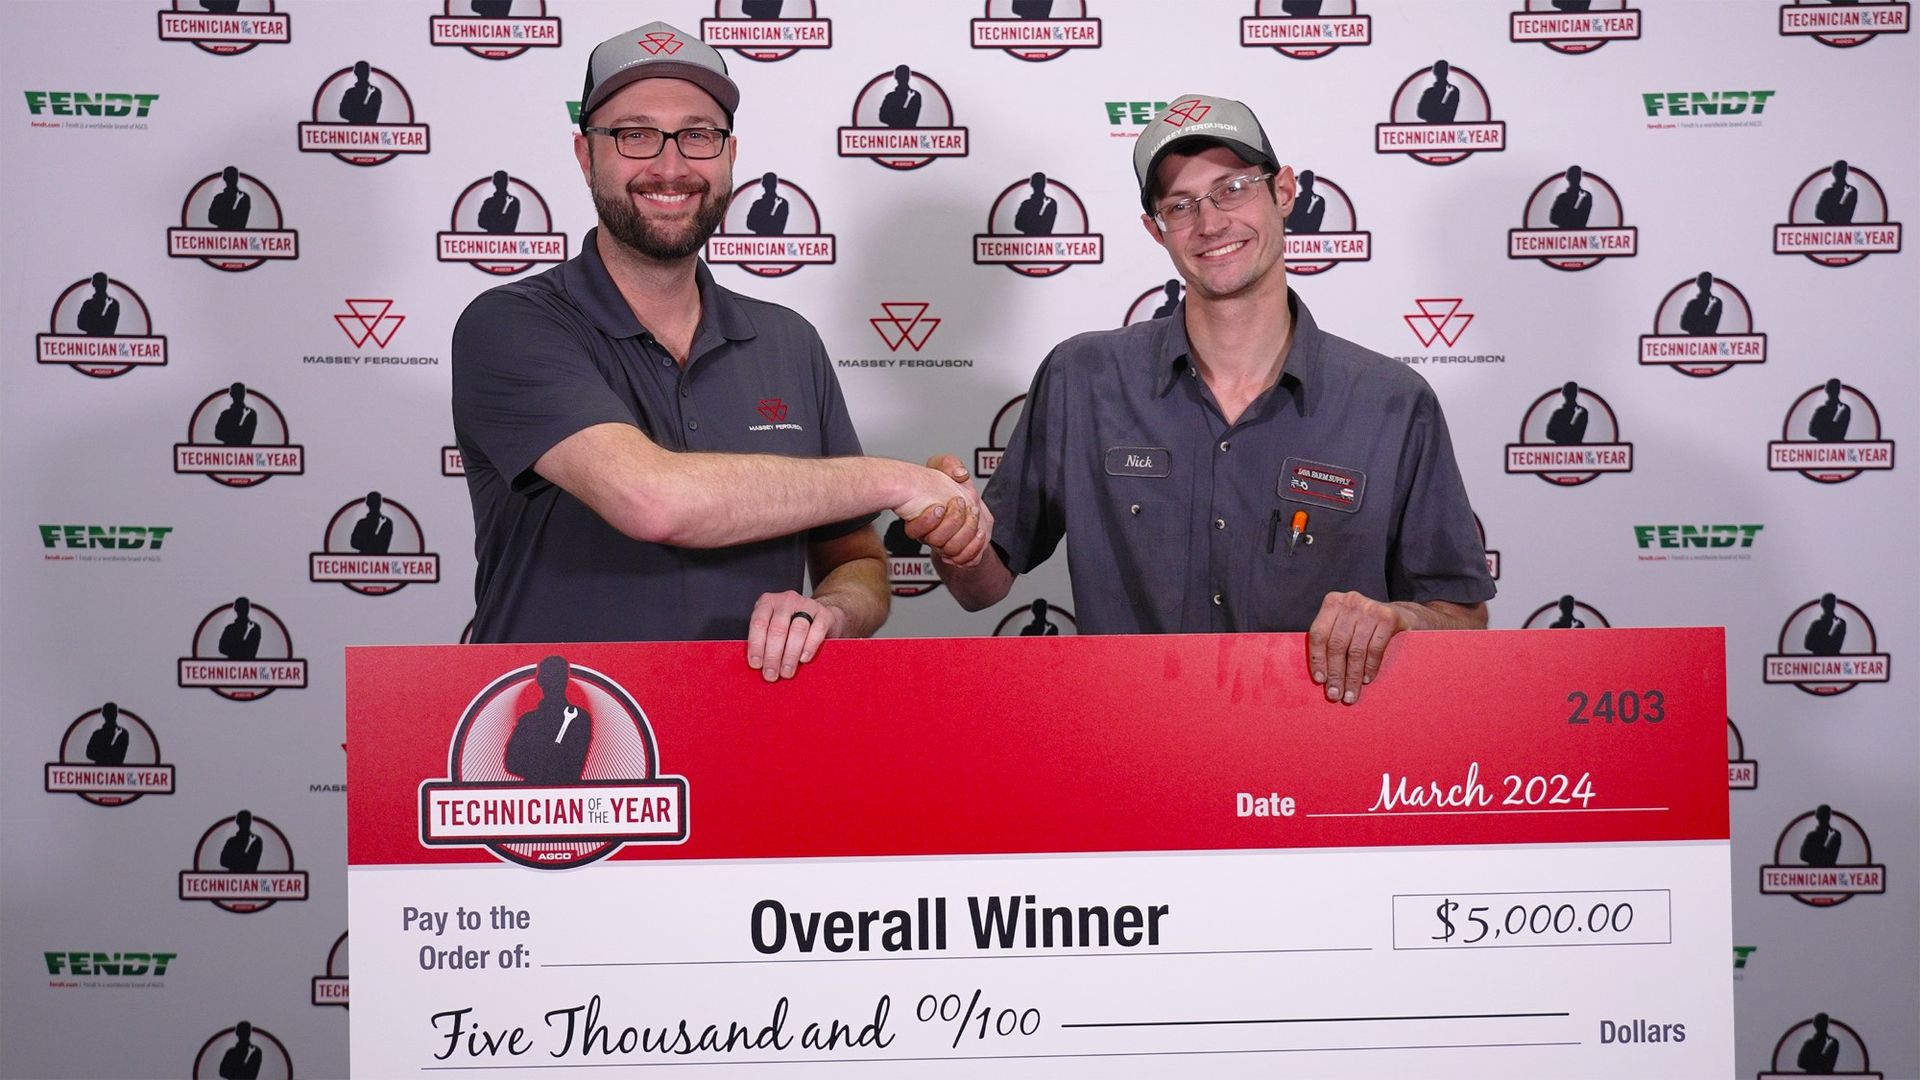 sh Alt, manager of technical training in North America presents a $5,000 grand prize to Nick Nelson. (Courtesy photo.)